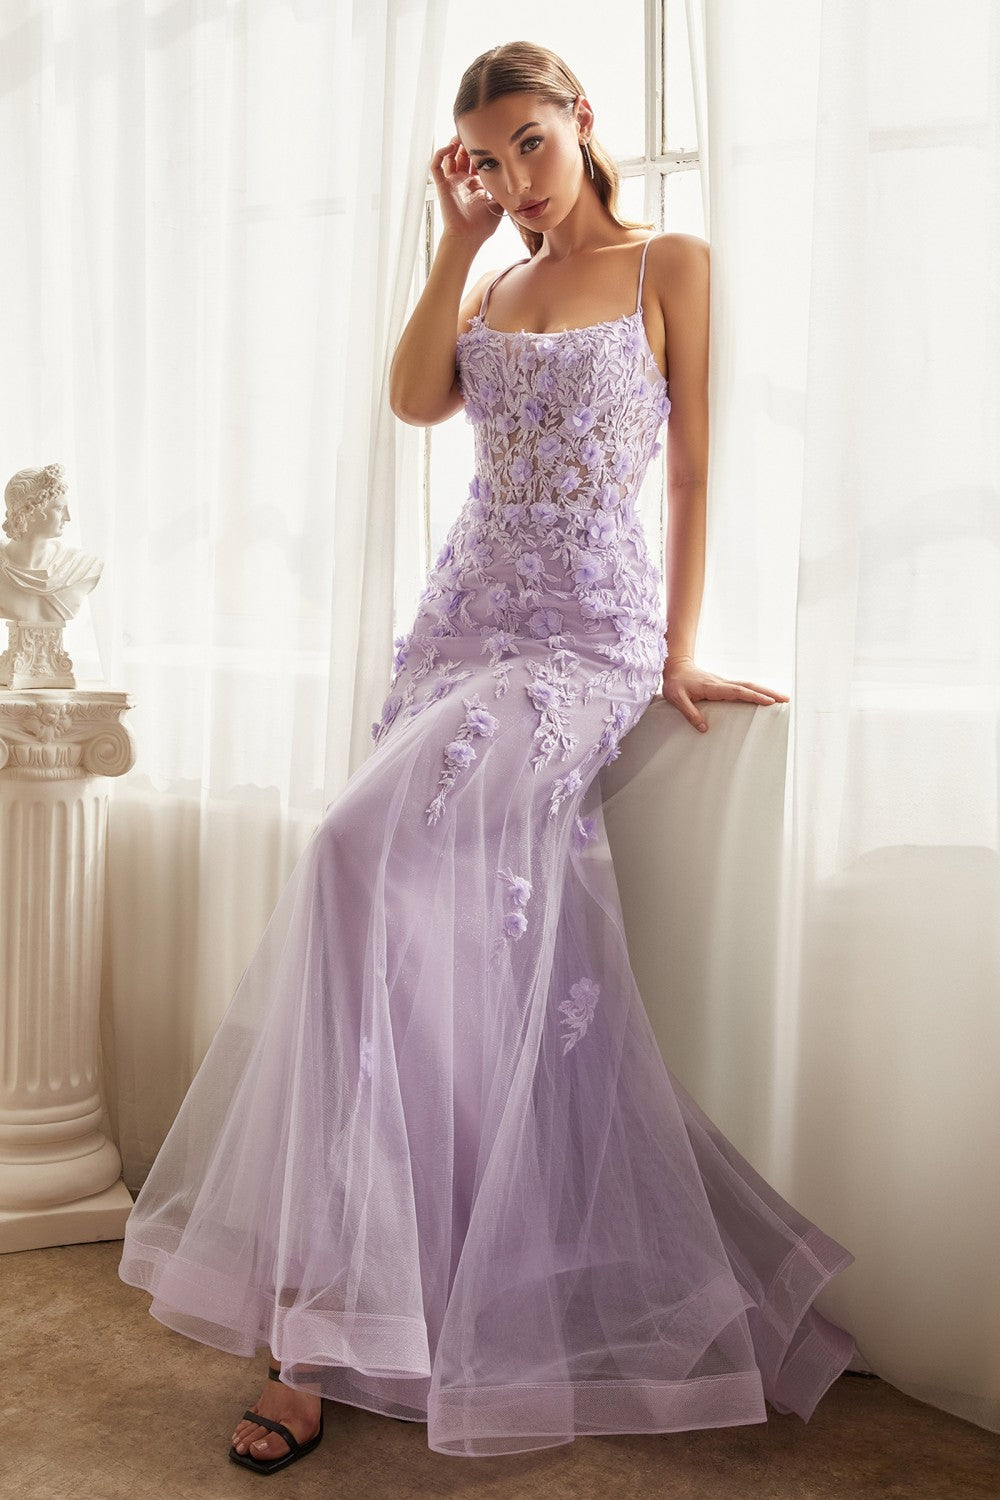 Everly Prom Dress Layered Tulle Floral Lace 740995TNR-Lavender